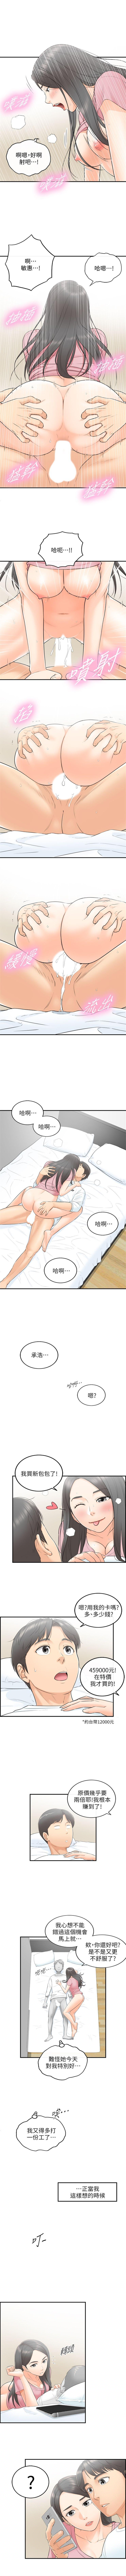 Load 正妹小主管 1-45 官方中文（連載中） Candid - Page 7